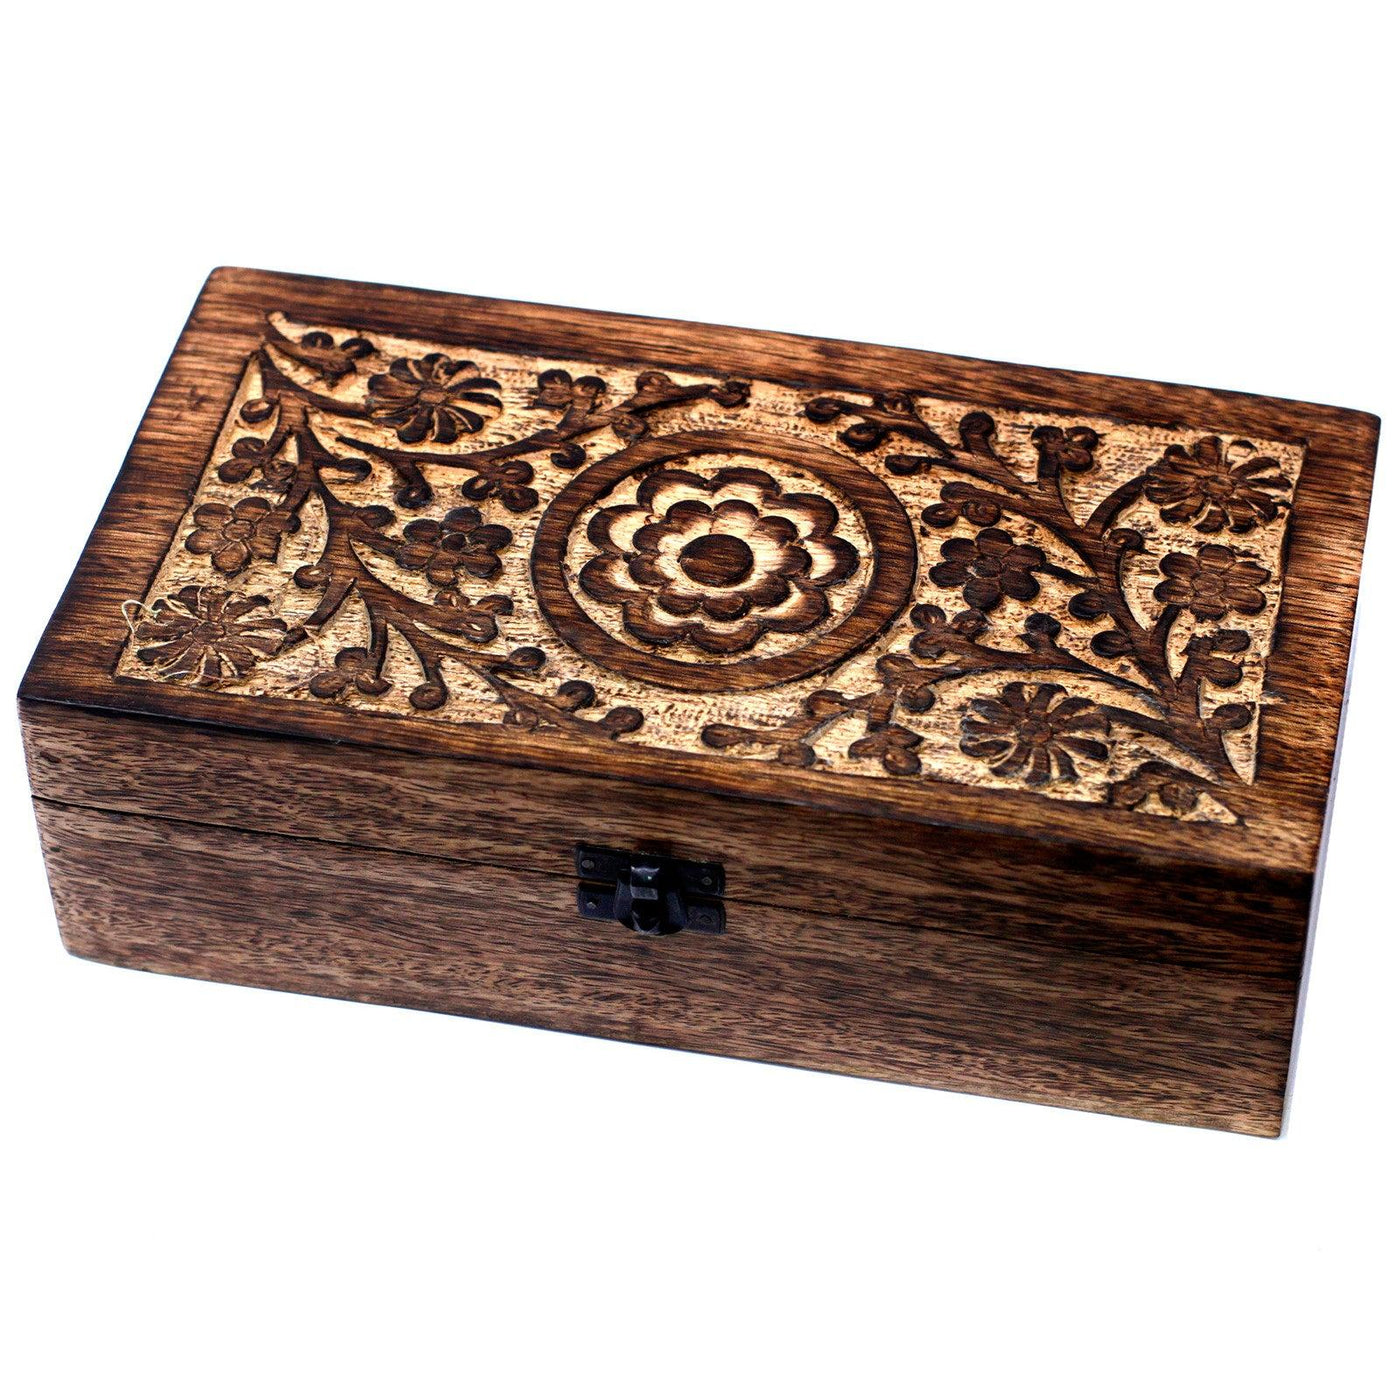 Floral Carved Mango Wood Aromatherapy And Jewellery Oils Storage Box for 10ml Bottles.